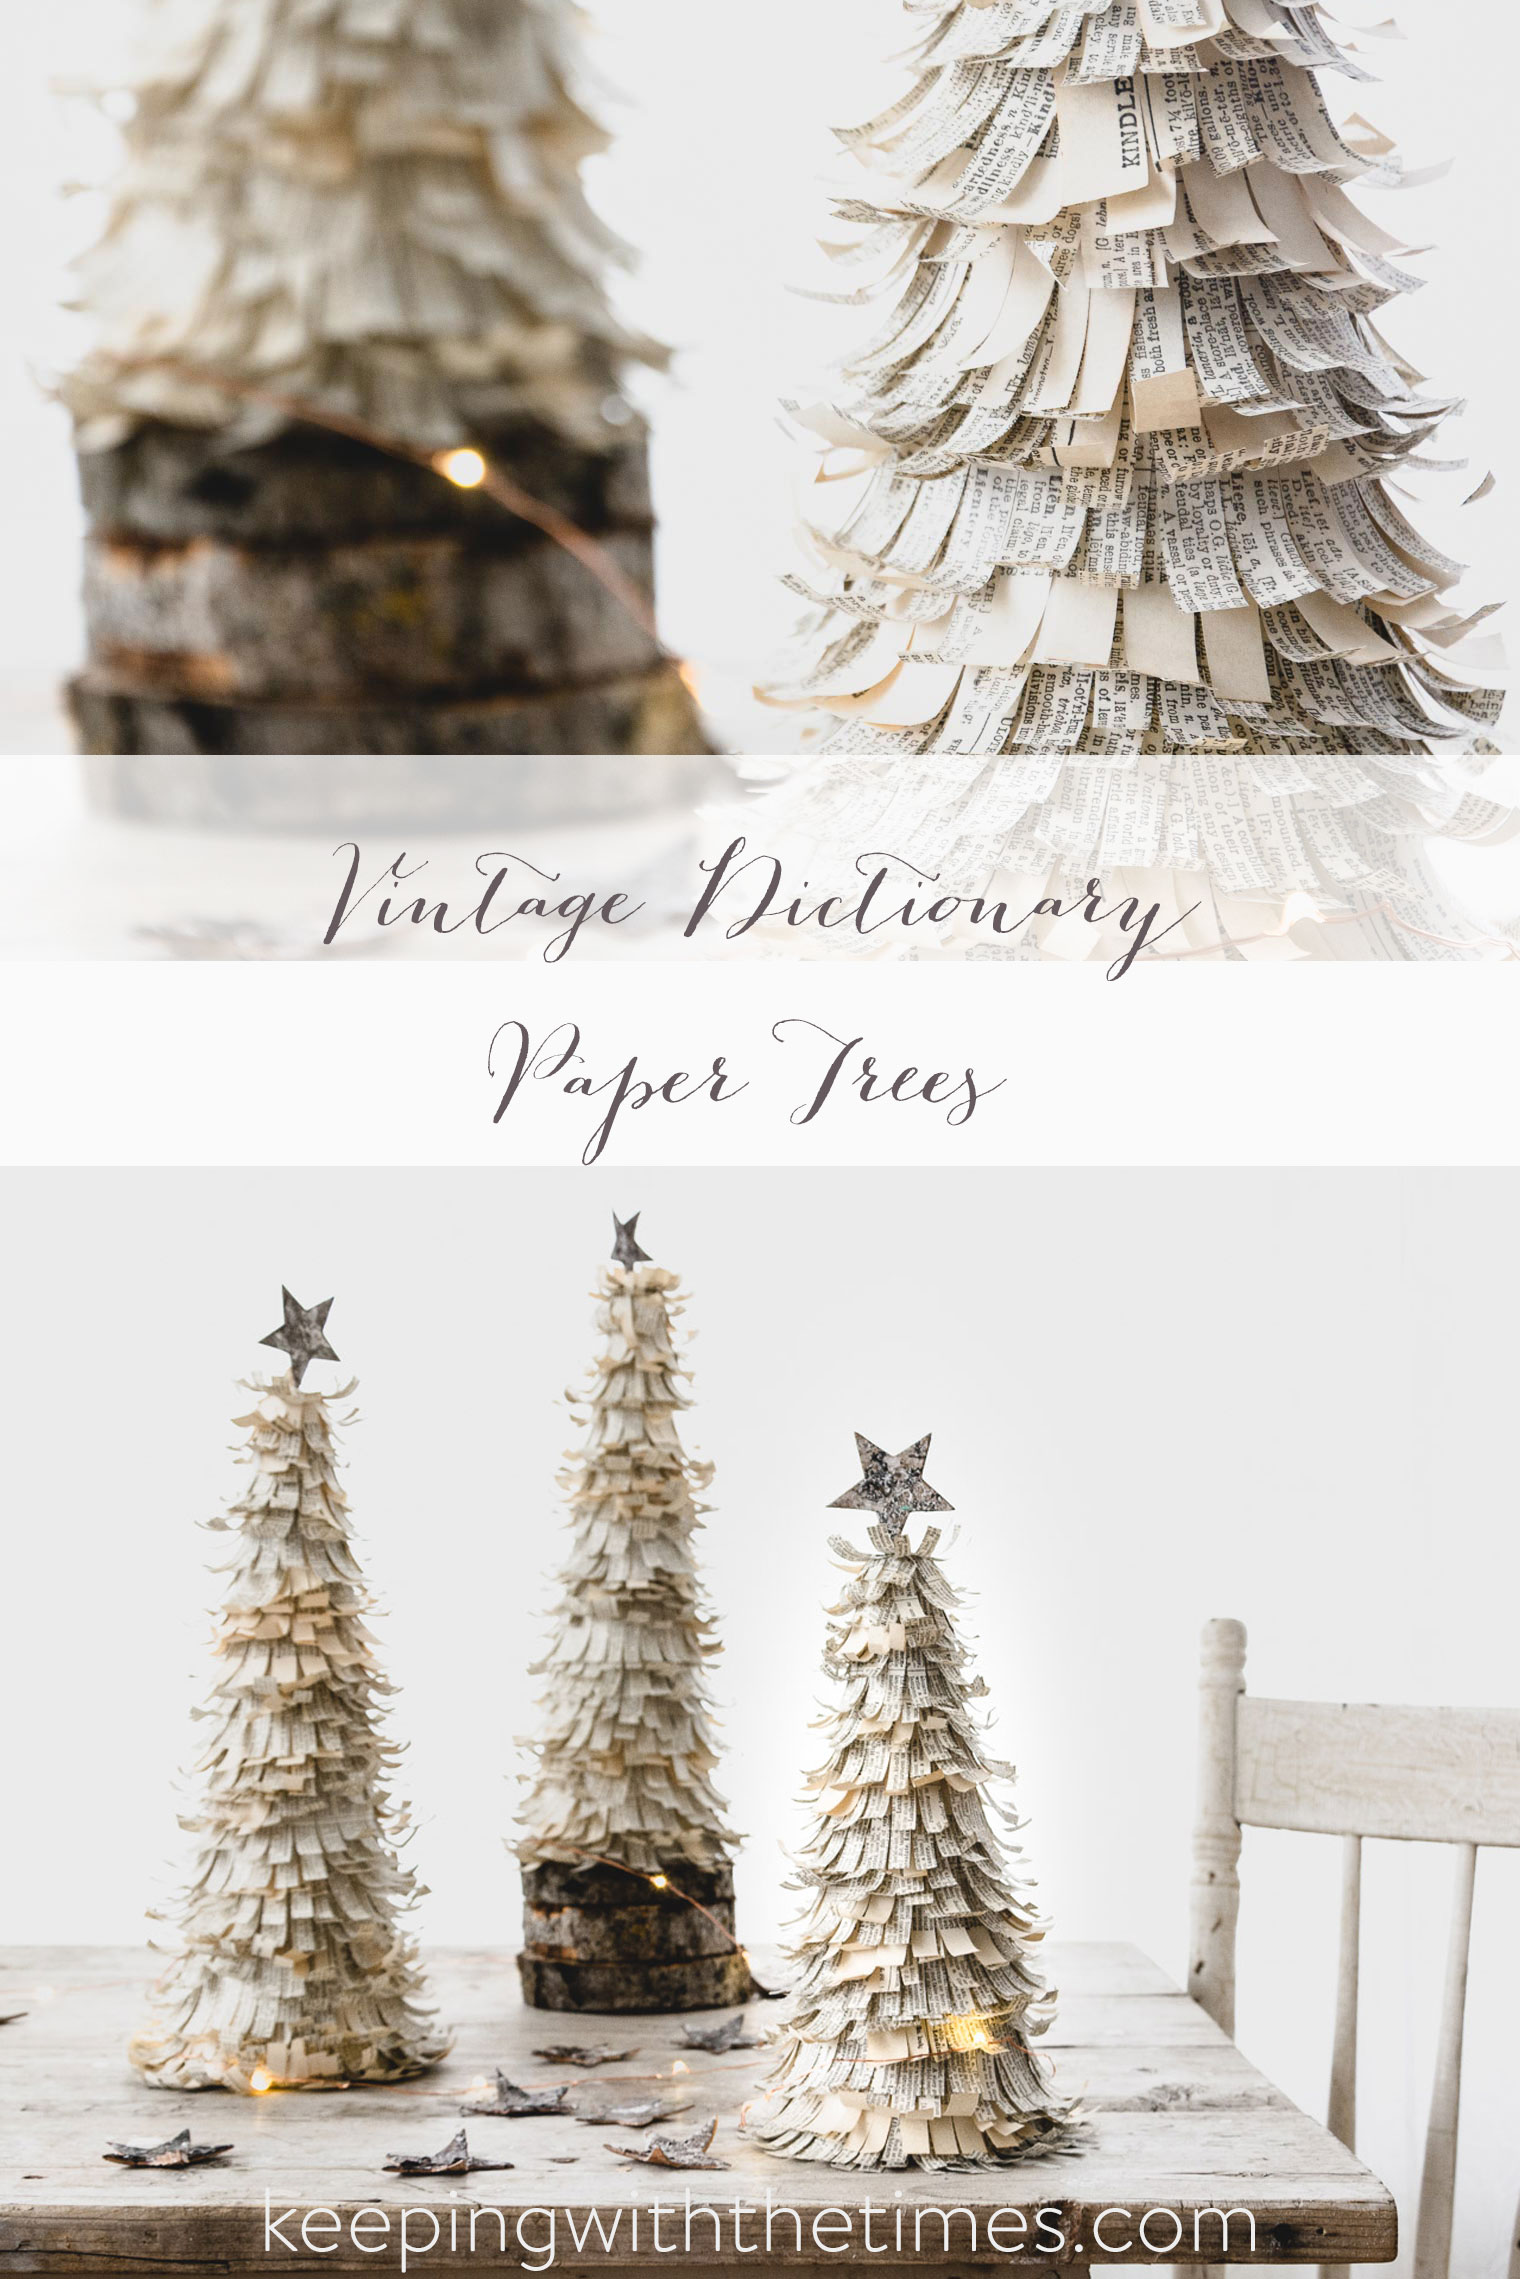 Dictionary Paper Trees, Keeping With the Times, Barb Brookbank